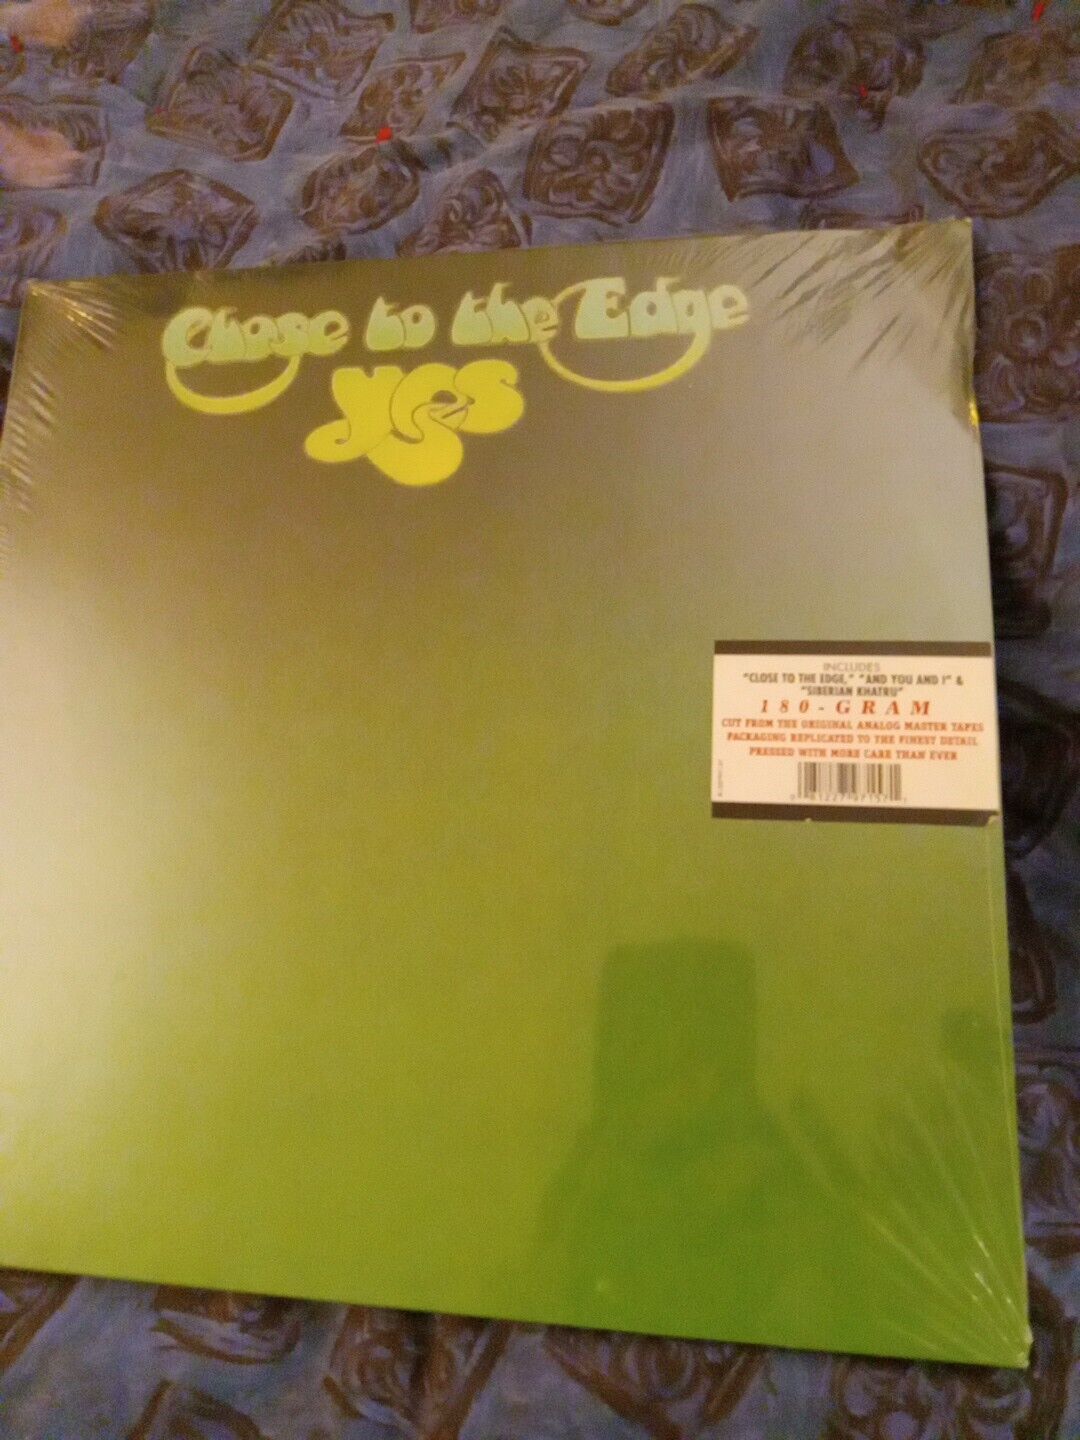 Close to the Edge by Yes (Record, 2012) 180 gm Vinyl